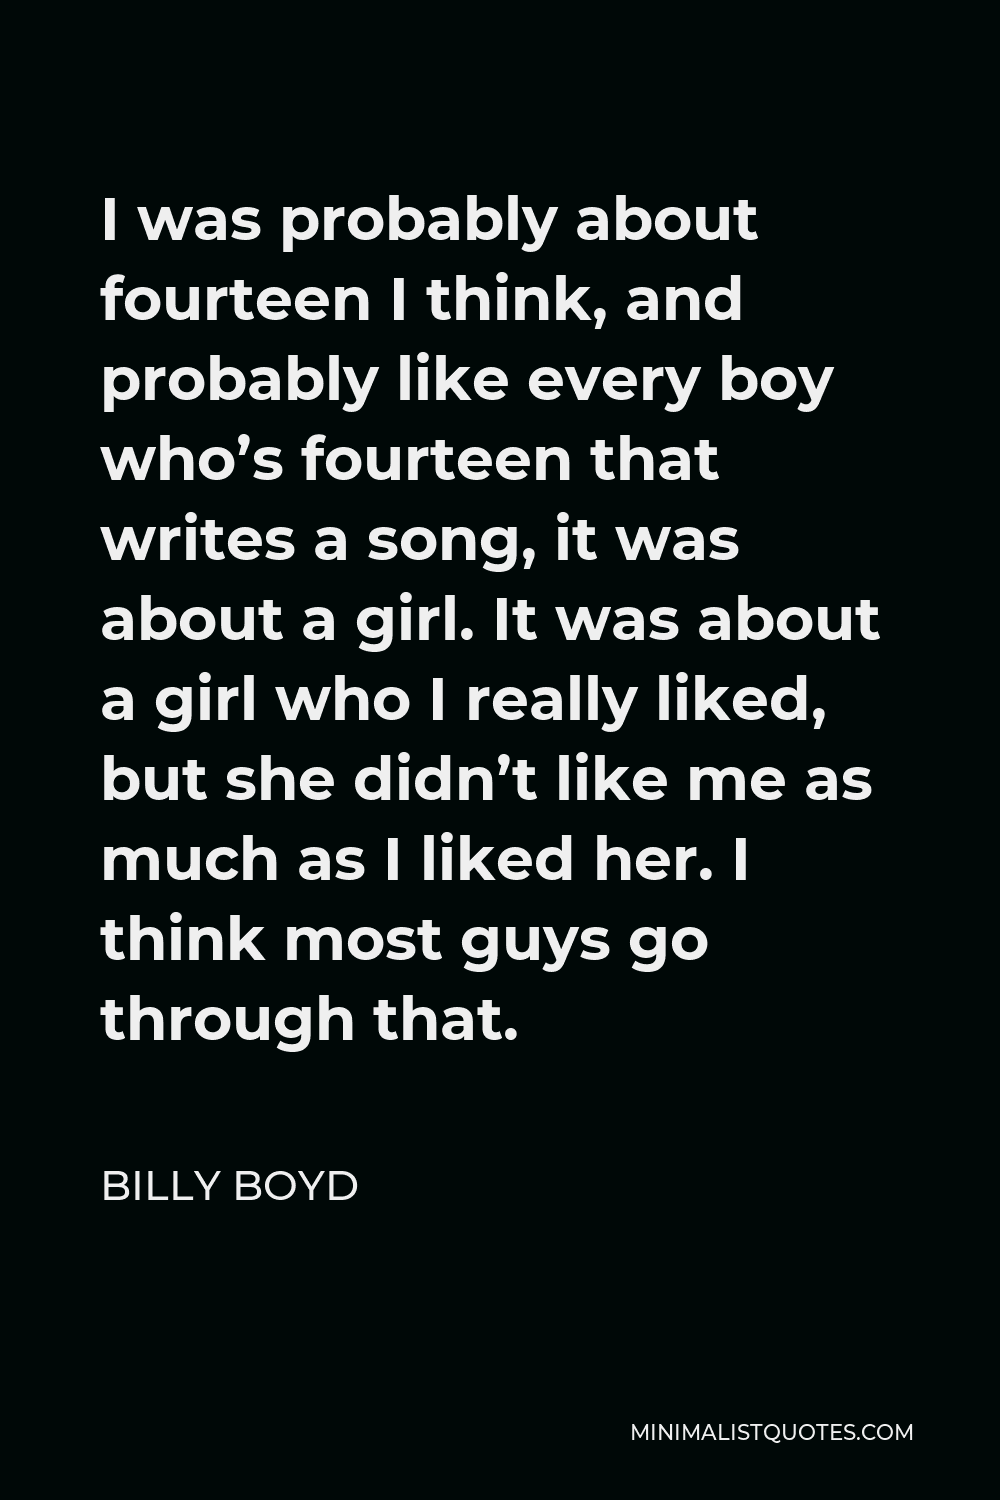 Billy Boyd Quote - I was probably about fourteen I think, and probably like every boy who’s fourteen that writes a song, it was about a girl. It was about a girl who I really liked, but she didn’t like me as much as I liked her. I think most guys go through that.